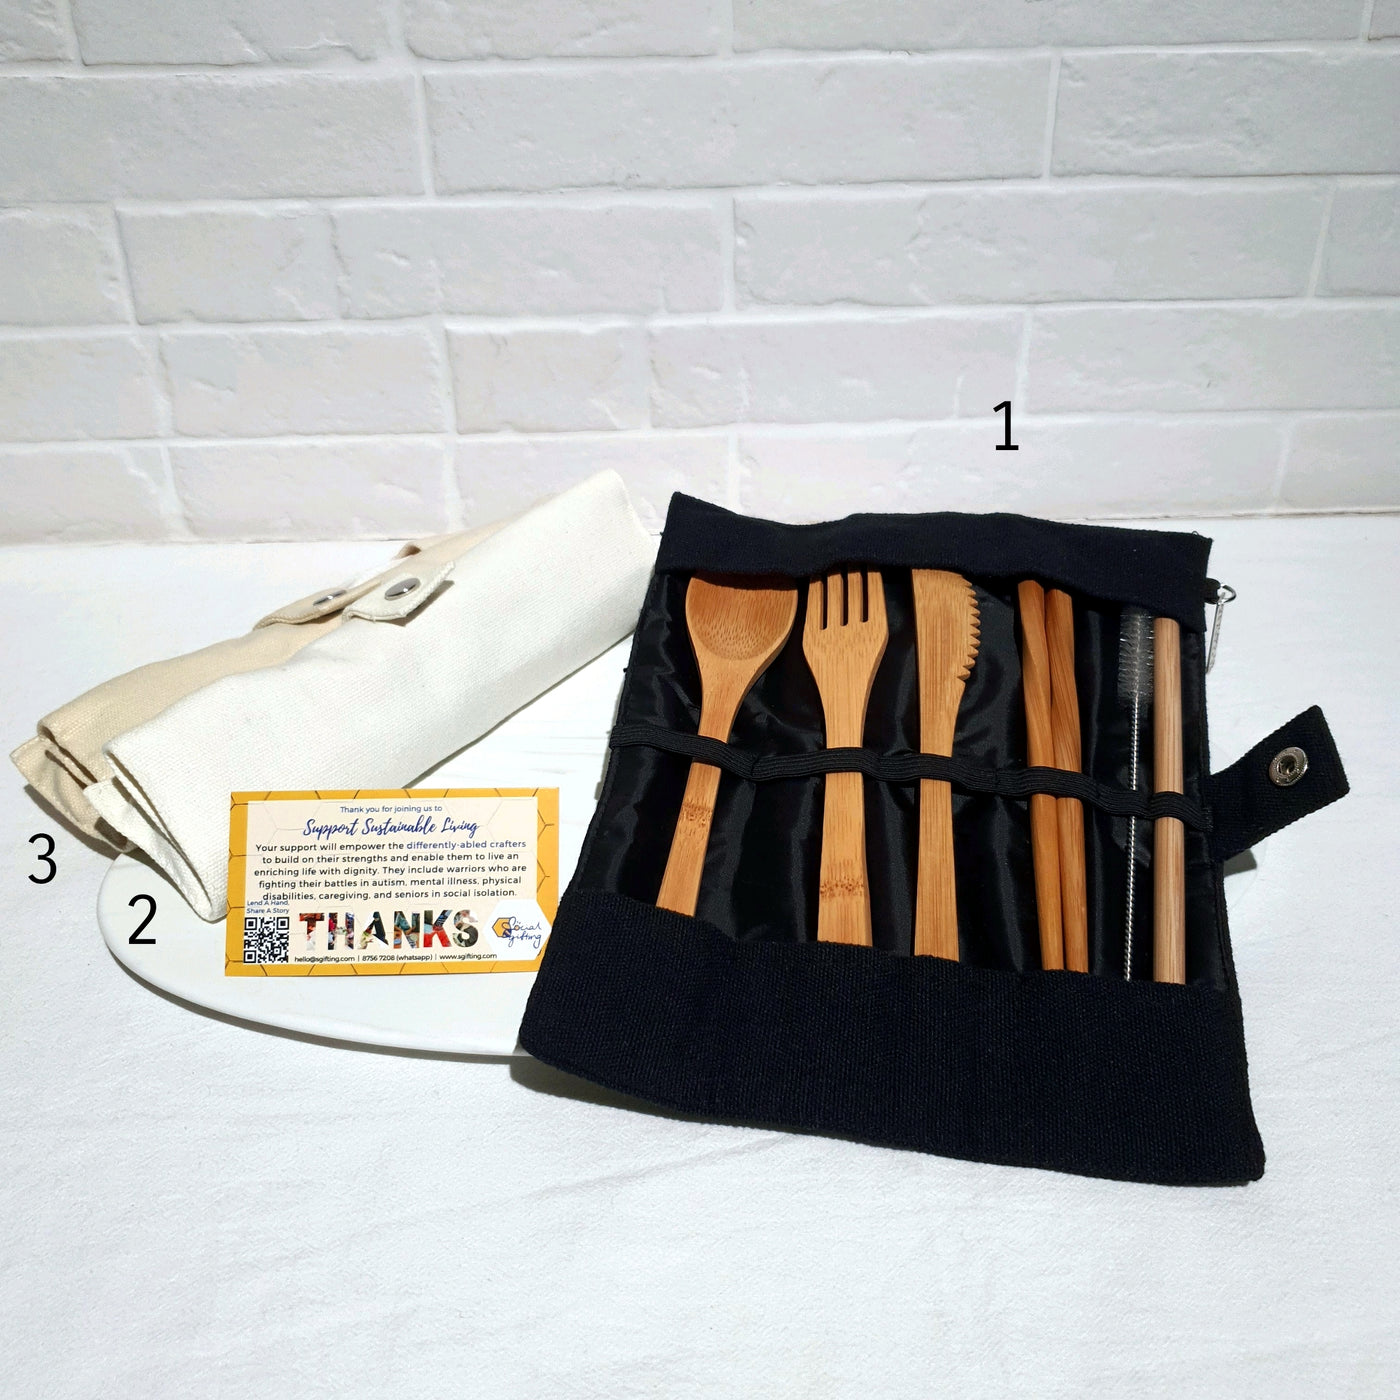 Bamboo Cutlery Set with Organiser Cover